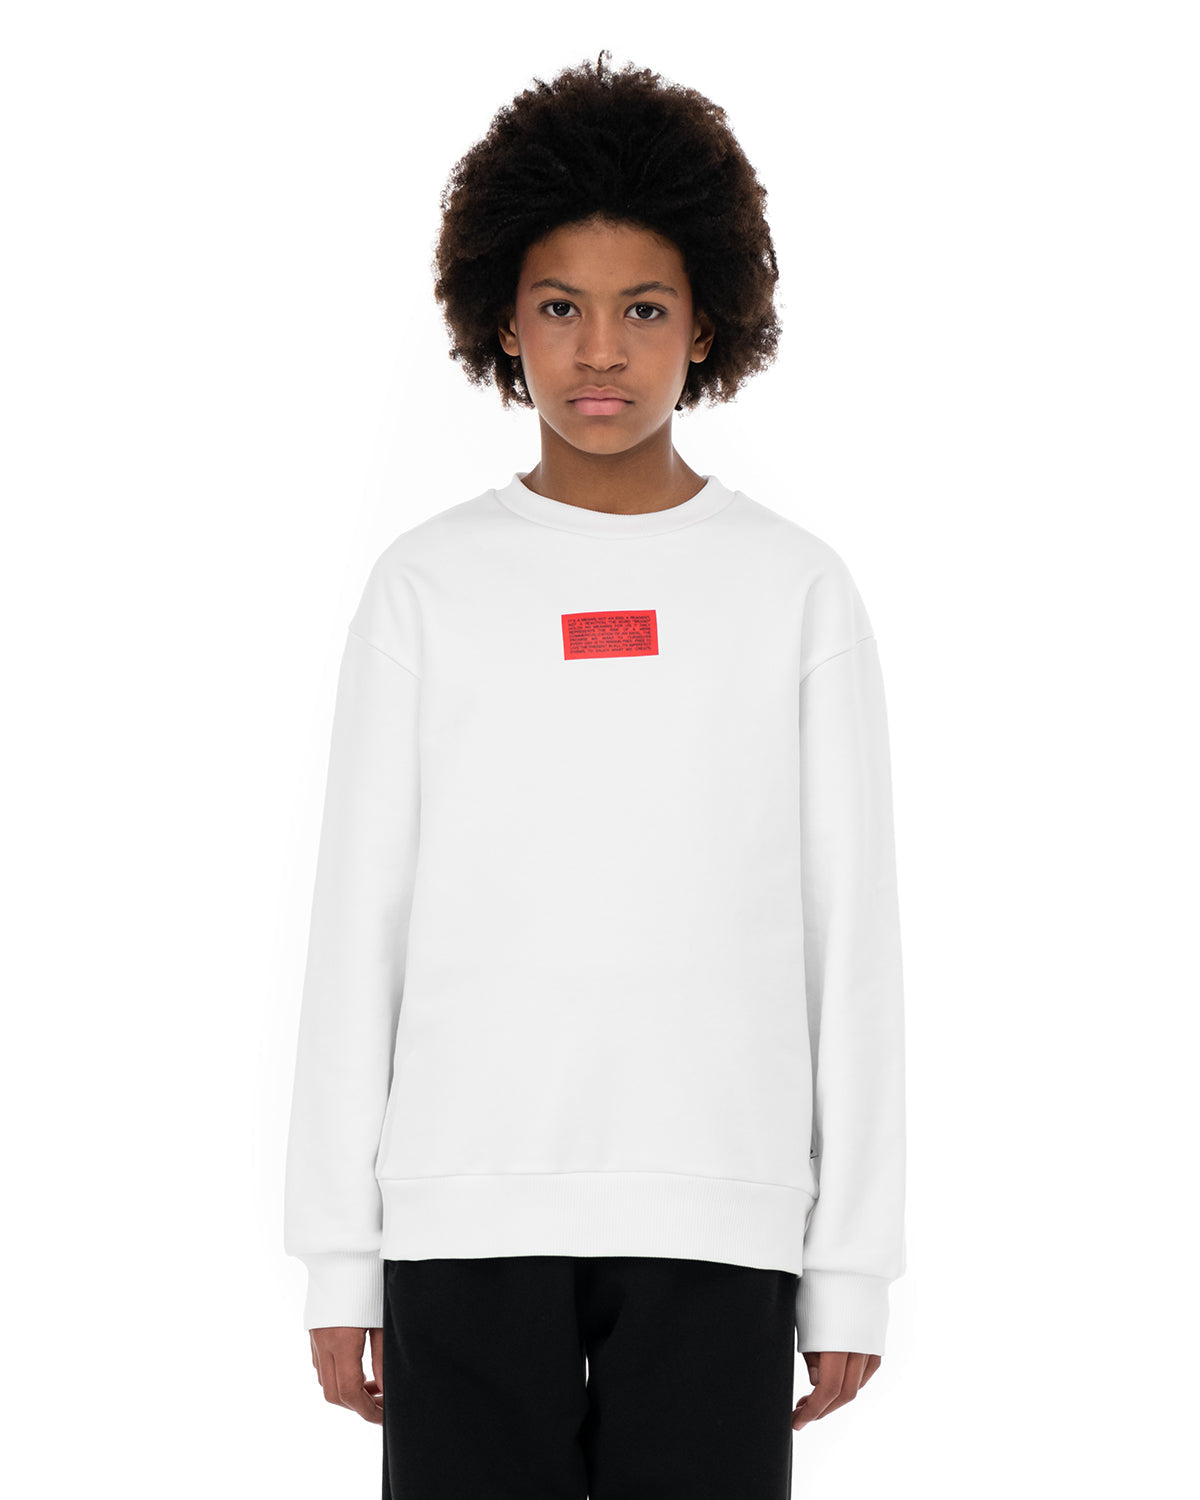 Playing is a seriiouse thing  Crewneck Sweatshirt | Blowhammer